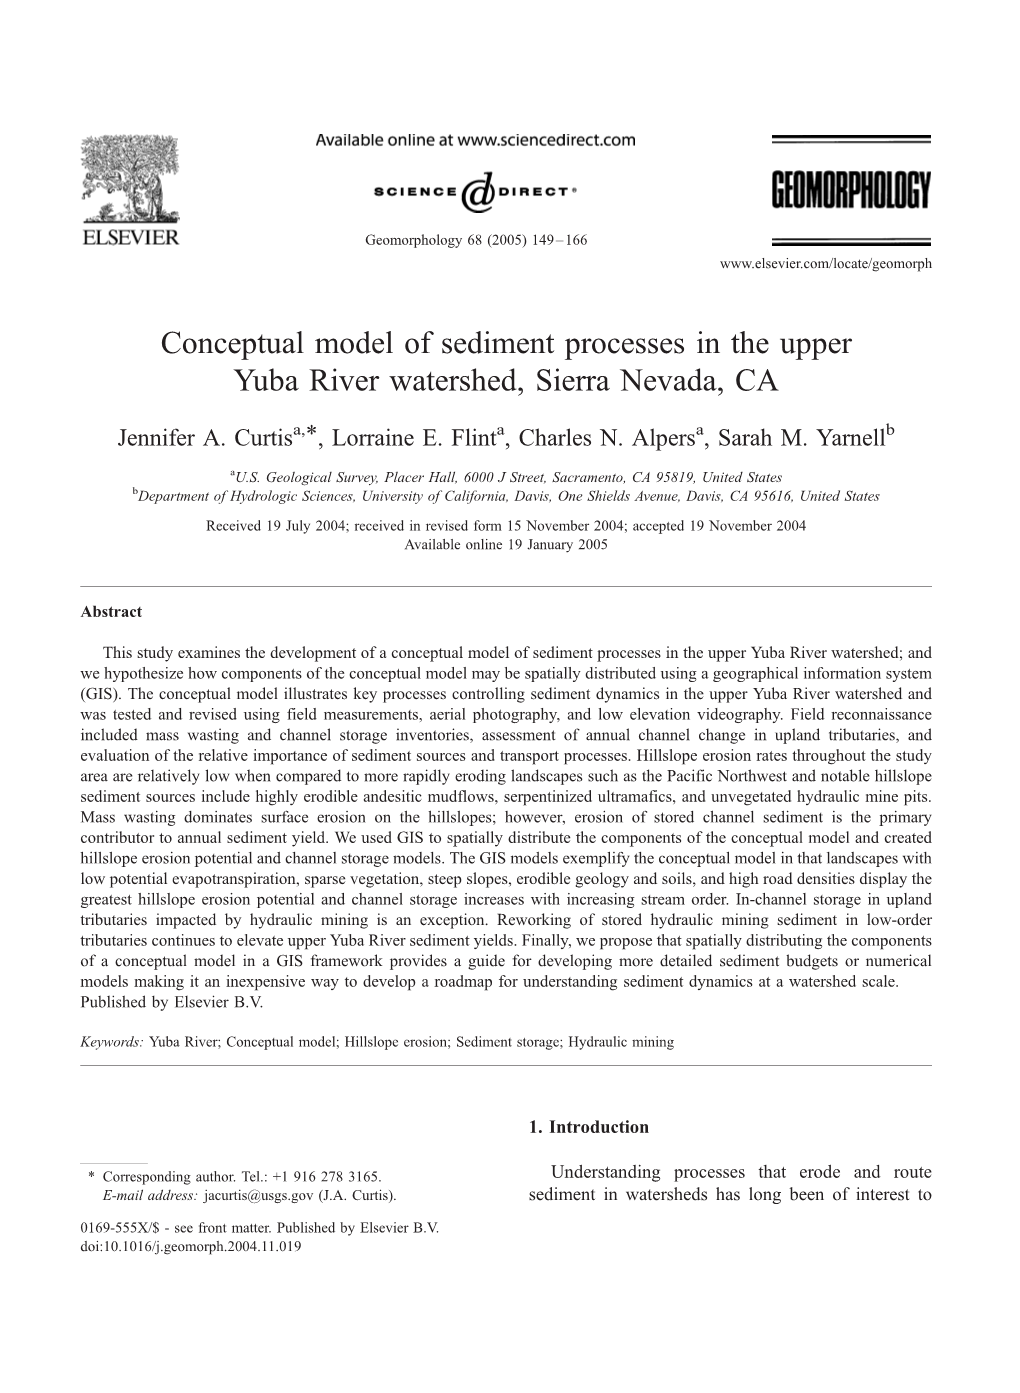 Conceptual Model of Sediment Processes in the Upper Yuba River Watershed, Sierra Nevada, CA